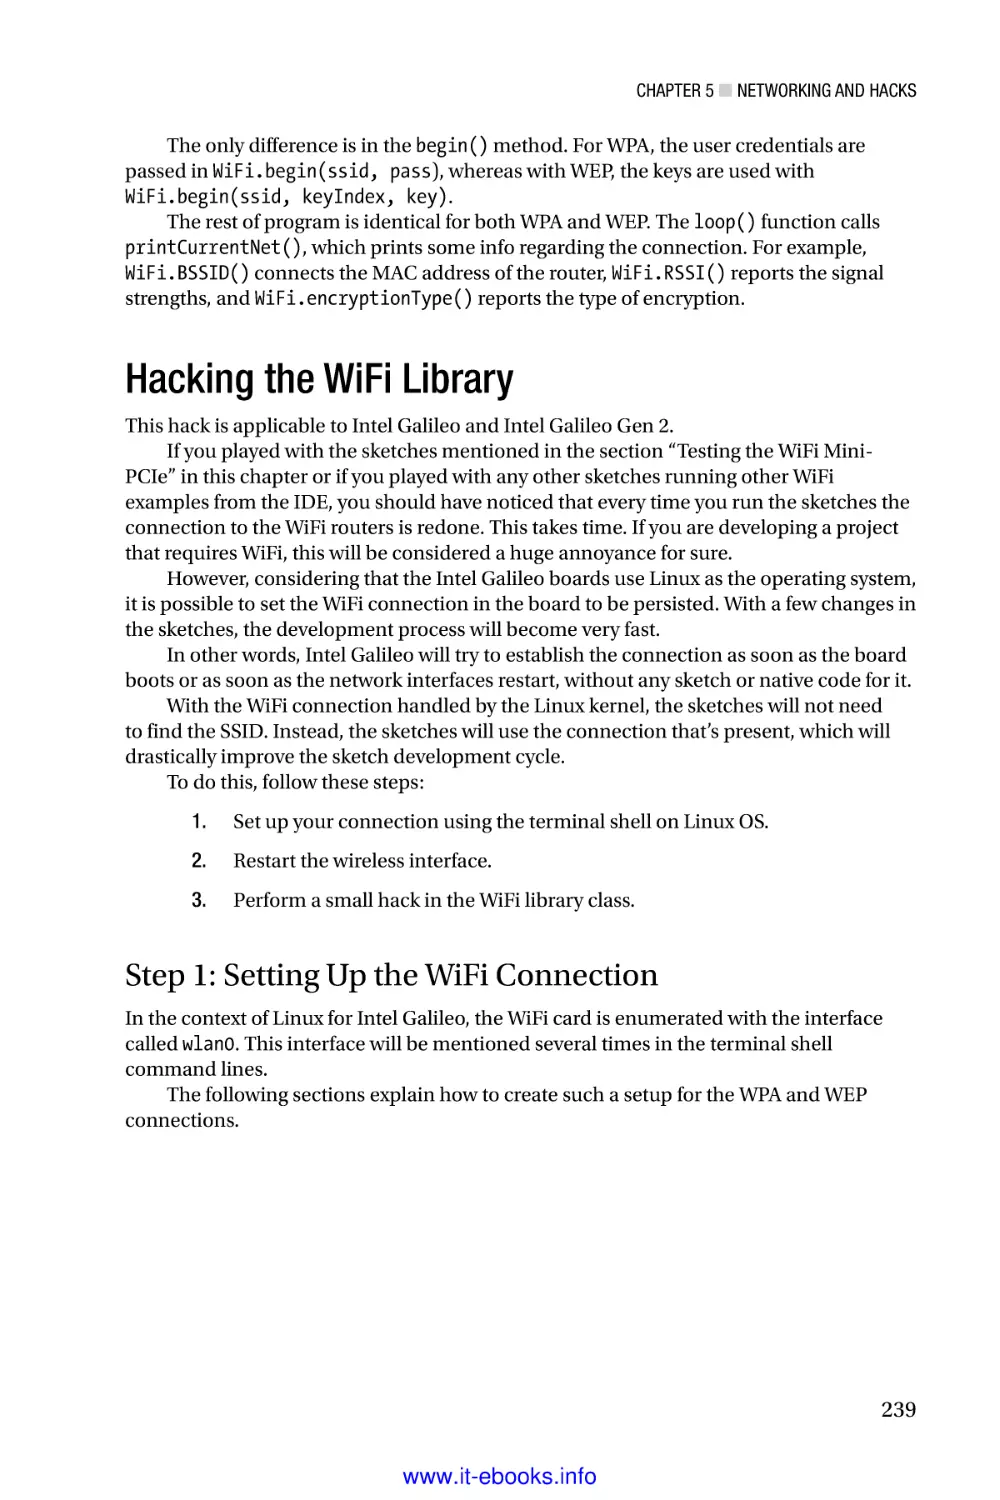 Hacking the WiFi Library
Step 1